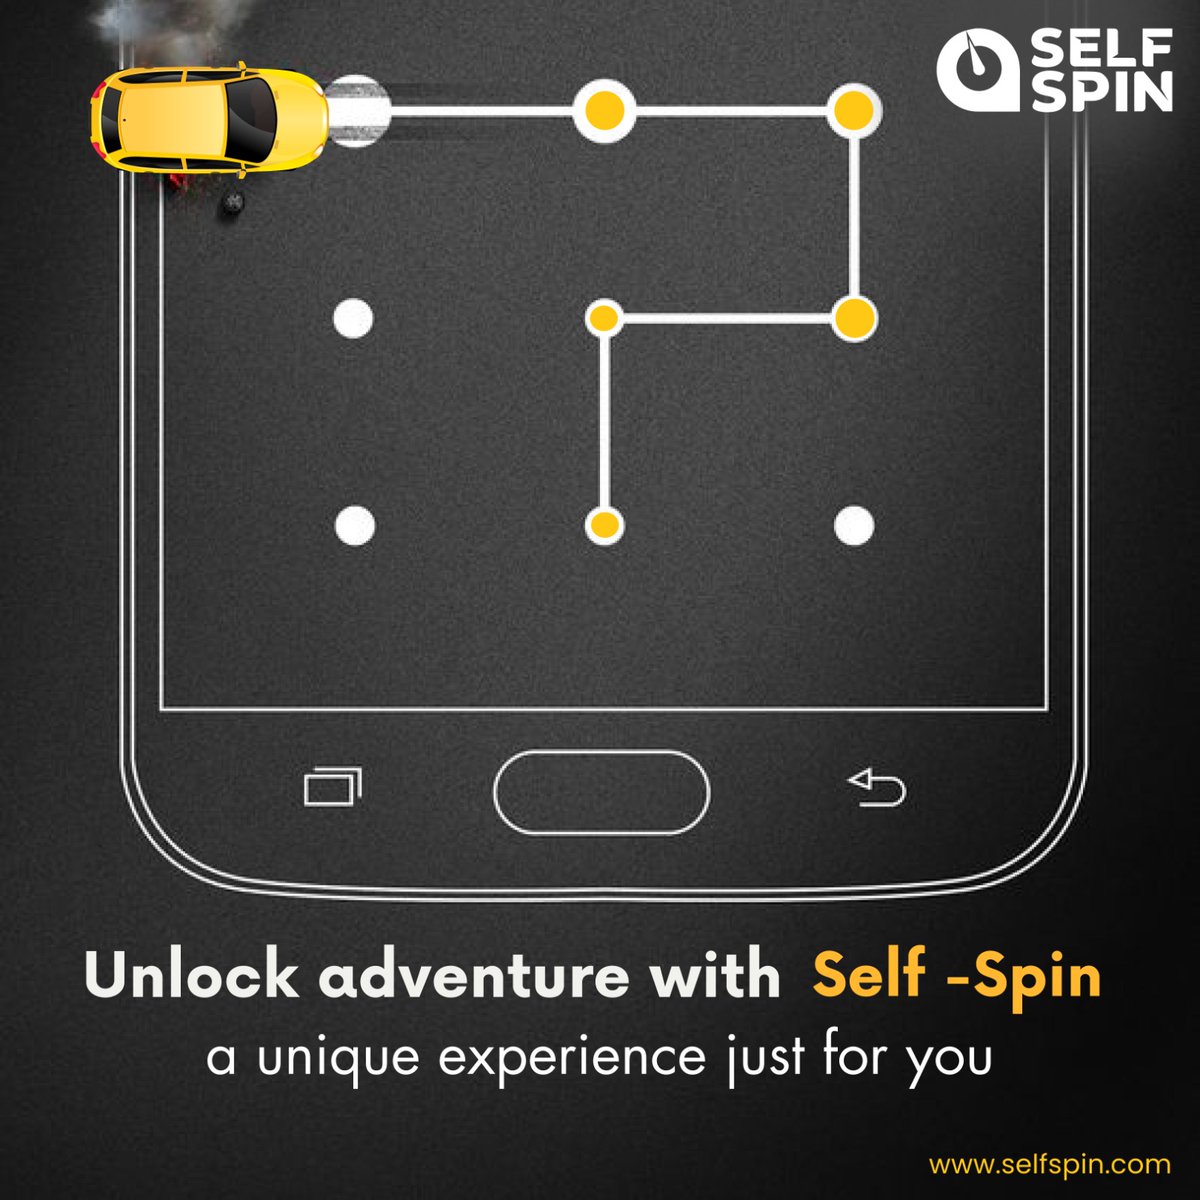 With Selfspin: Unlock the zeal for adventure with assured security, convenience and freedom

#SelfDrive #SelfSpin #CarRental #Pune #Bengaluru #Goa #RentalServices #BikeRental #SelfDriveRental #AnytimeAnywhere #RoadTrips #AdventureAwaits